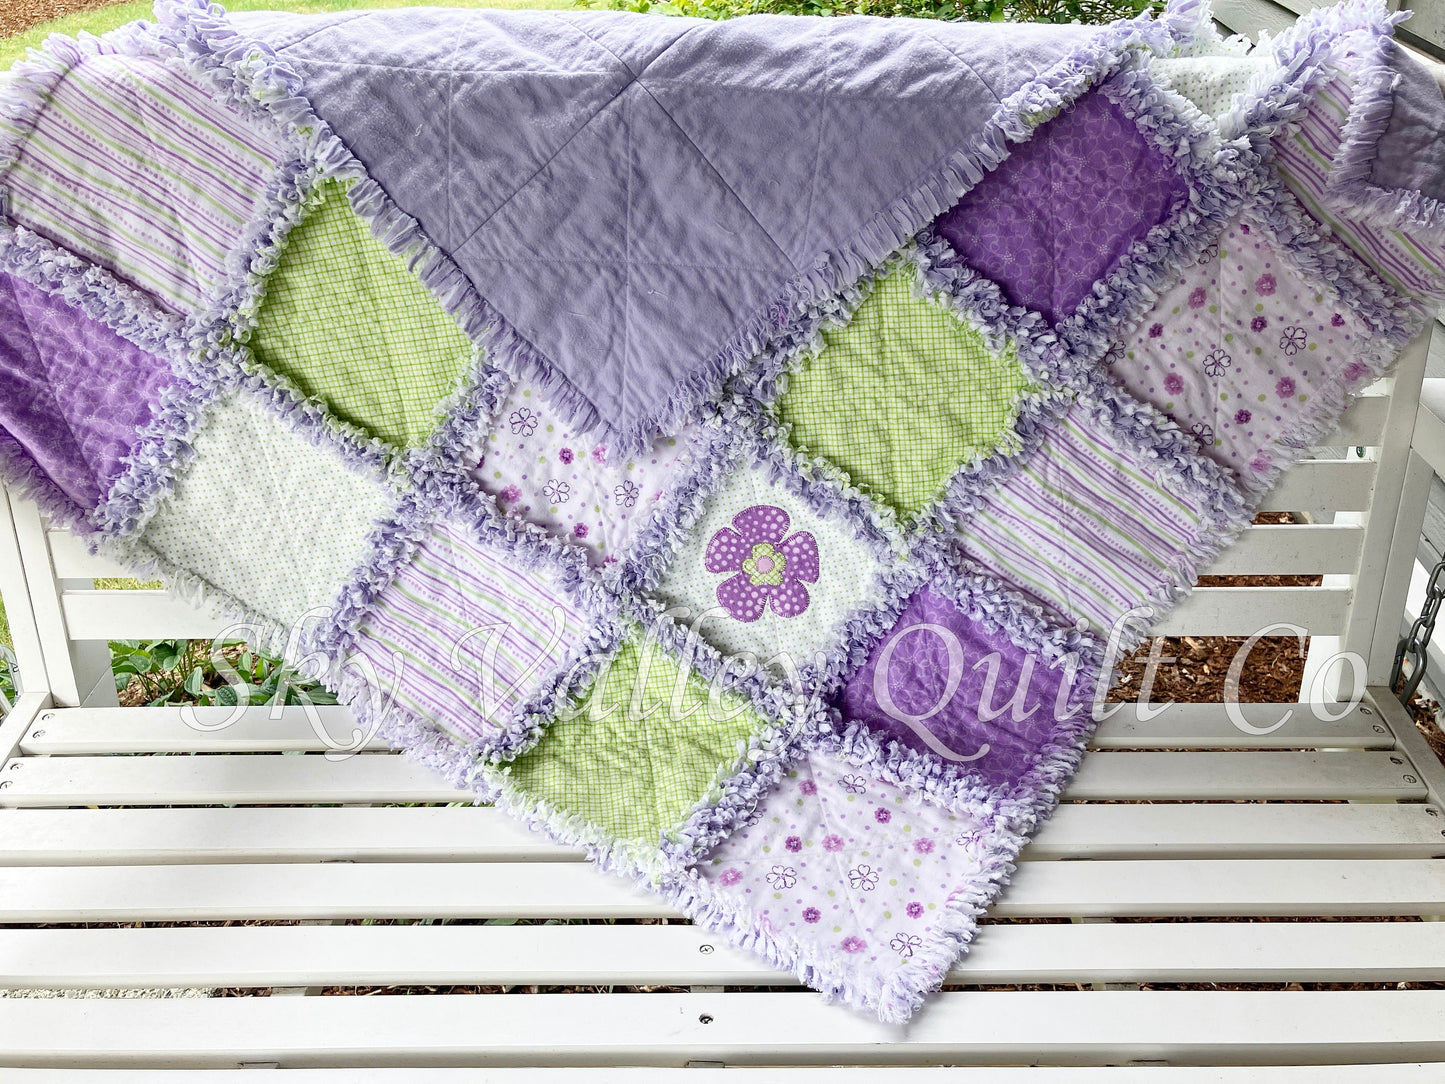 Finished and ready to ship Rag Quilt ~ funky flowers, lavender, purple, green and white